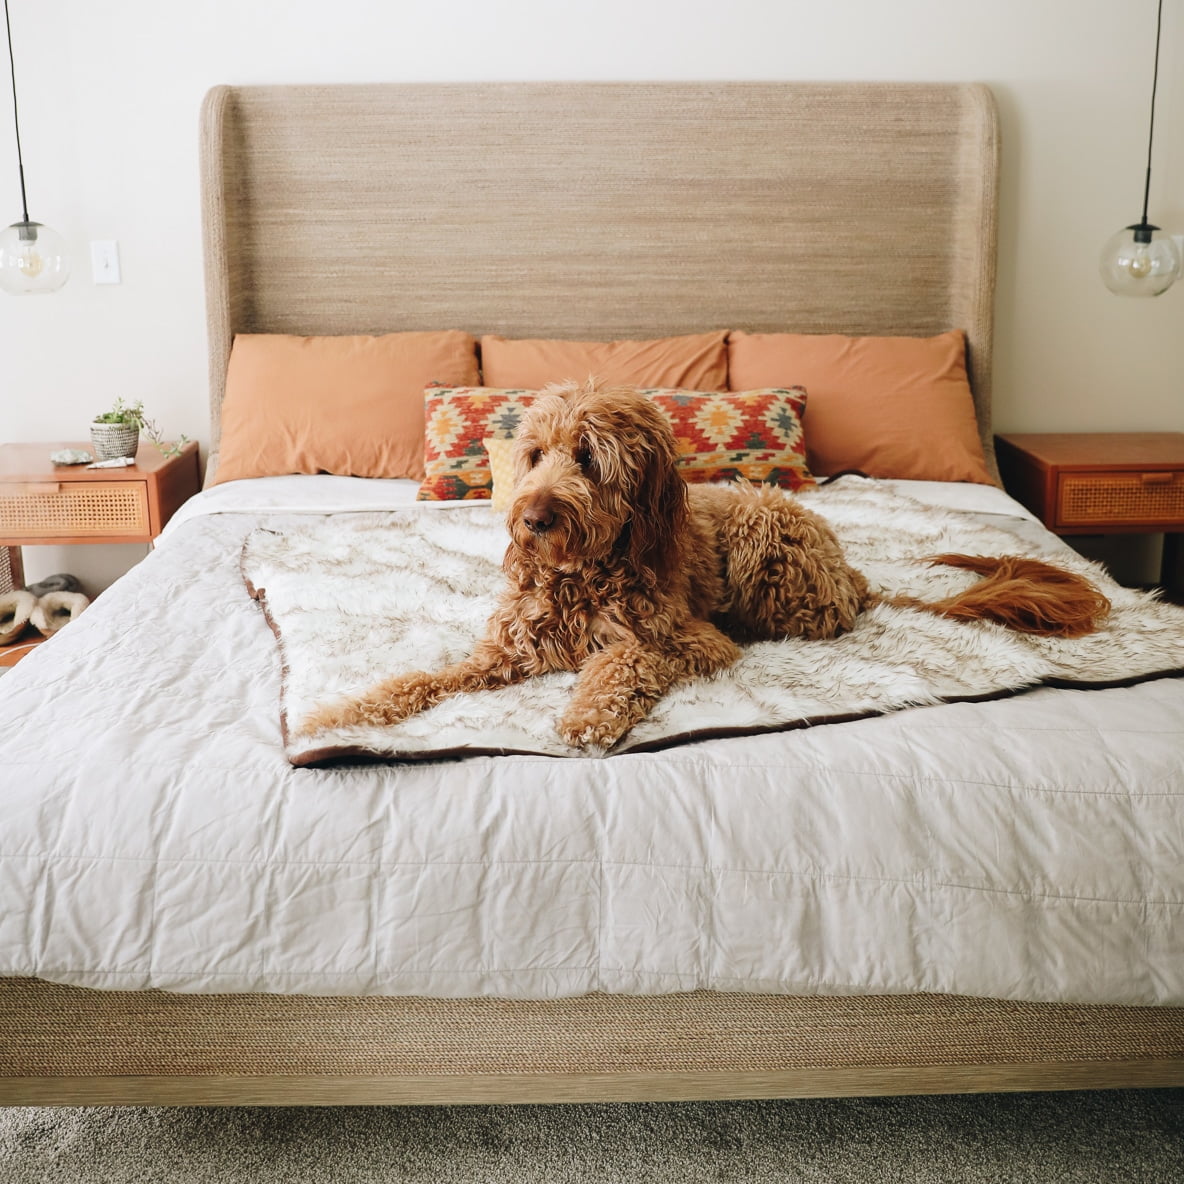 Sustainable Bedding Companies - The Healthy Maven